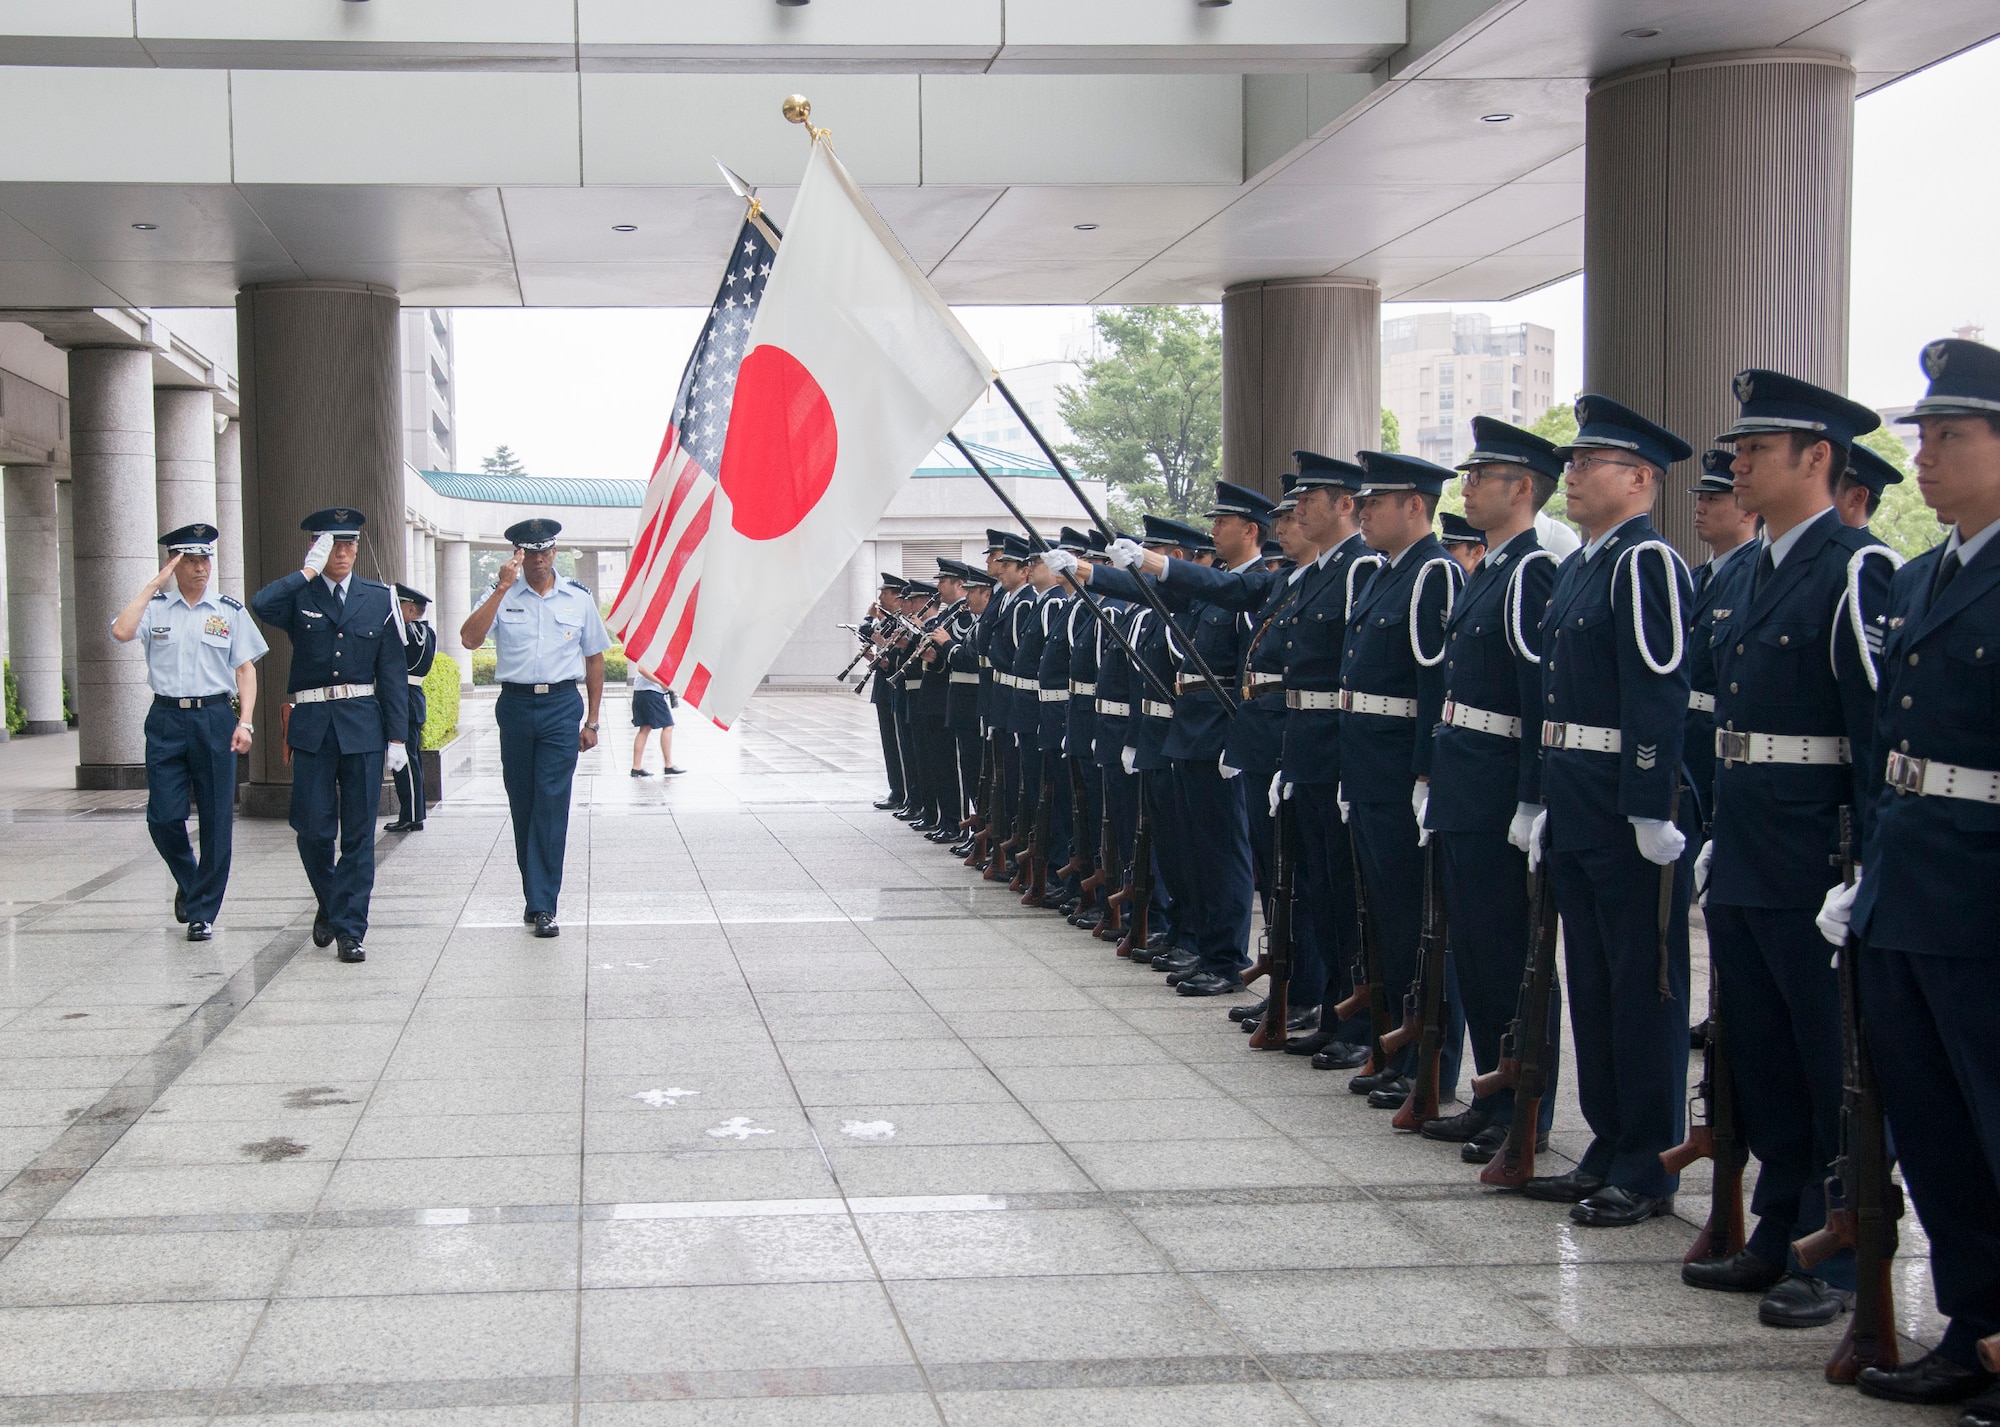 Gen. CQ Brown, Jr., Pacific Air Forces commander, and Gen. Yoshinari Marumo, Chief of Staff, Koku-Jietai (Japan Air Self Defense Force), perform an inspection of the honor guard during a ceremony at the Ministry of Defense in Tokyo, Japan, Aug. 7, 2018. Brown visited the country to affirm the United States' shared commitment to a free and open Indo-Pacific as well as to seek opportunities to enhance cooperation and coordination across the alliance. For more than 60 years, the U.S.-Japan alliance has been the cornerstone for stability and security in the region.